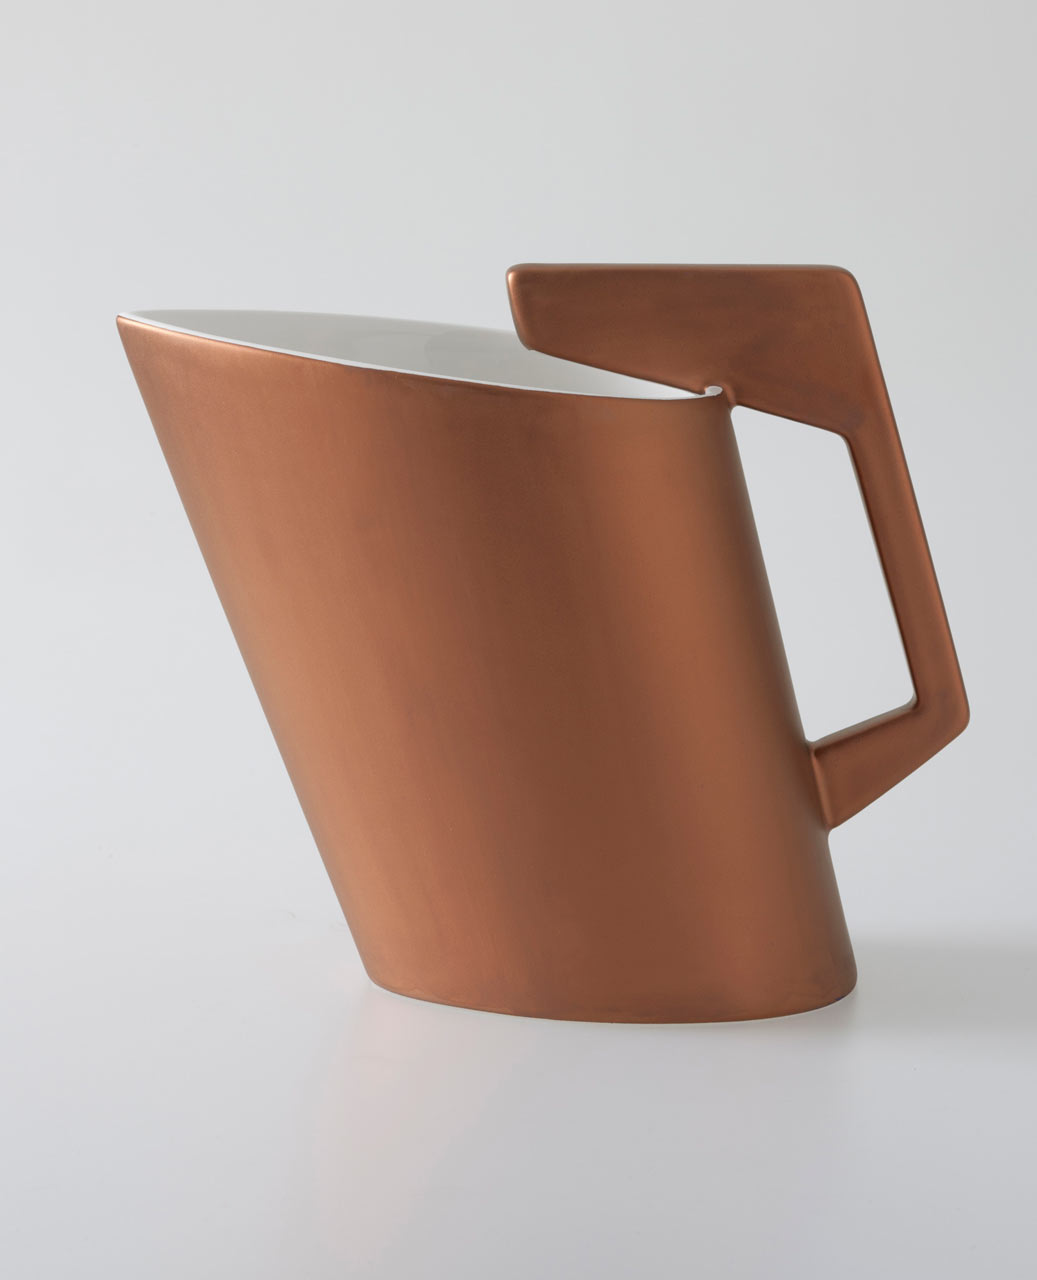 H2O Bilbao: A Water Pitcher Designed for Charity